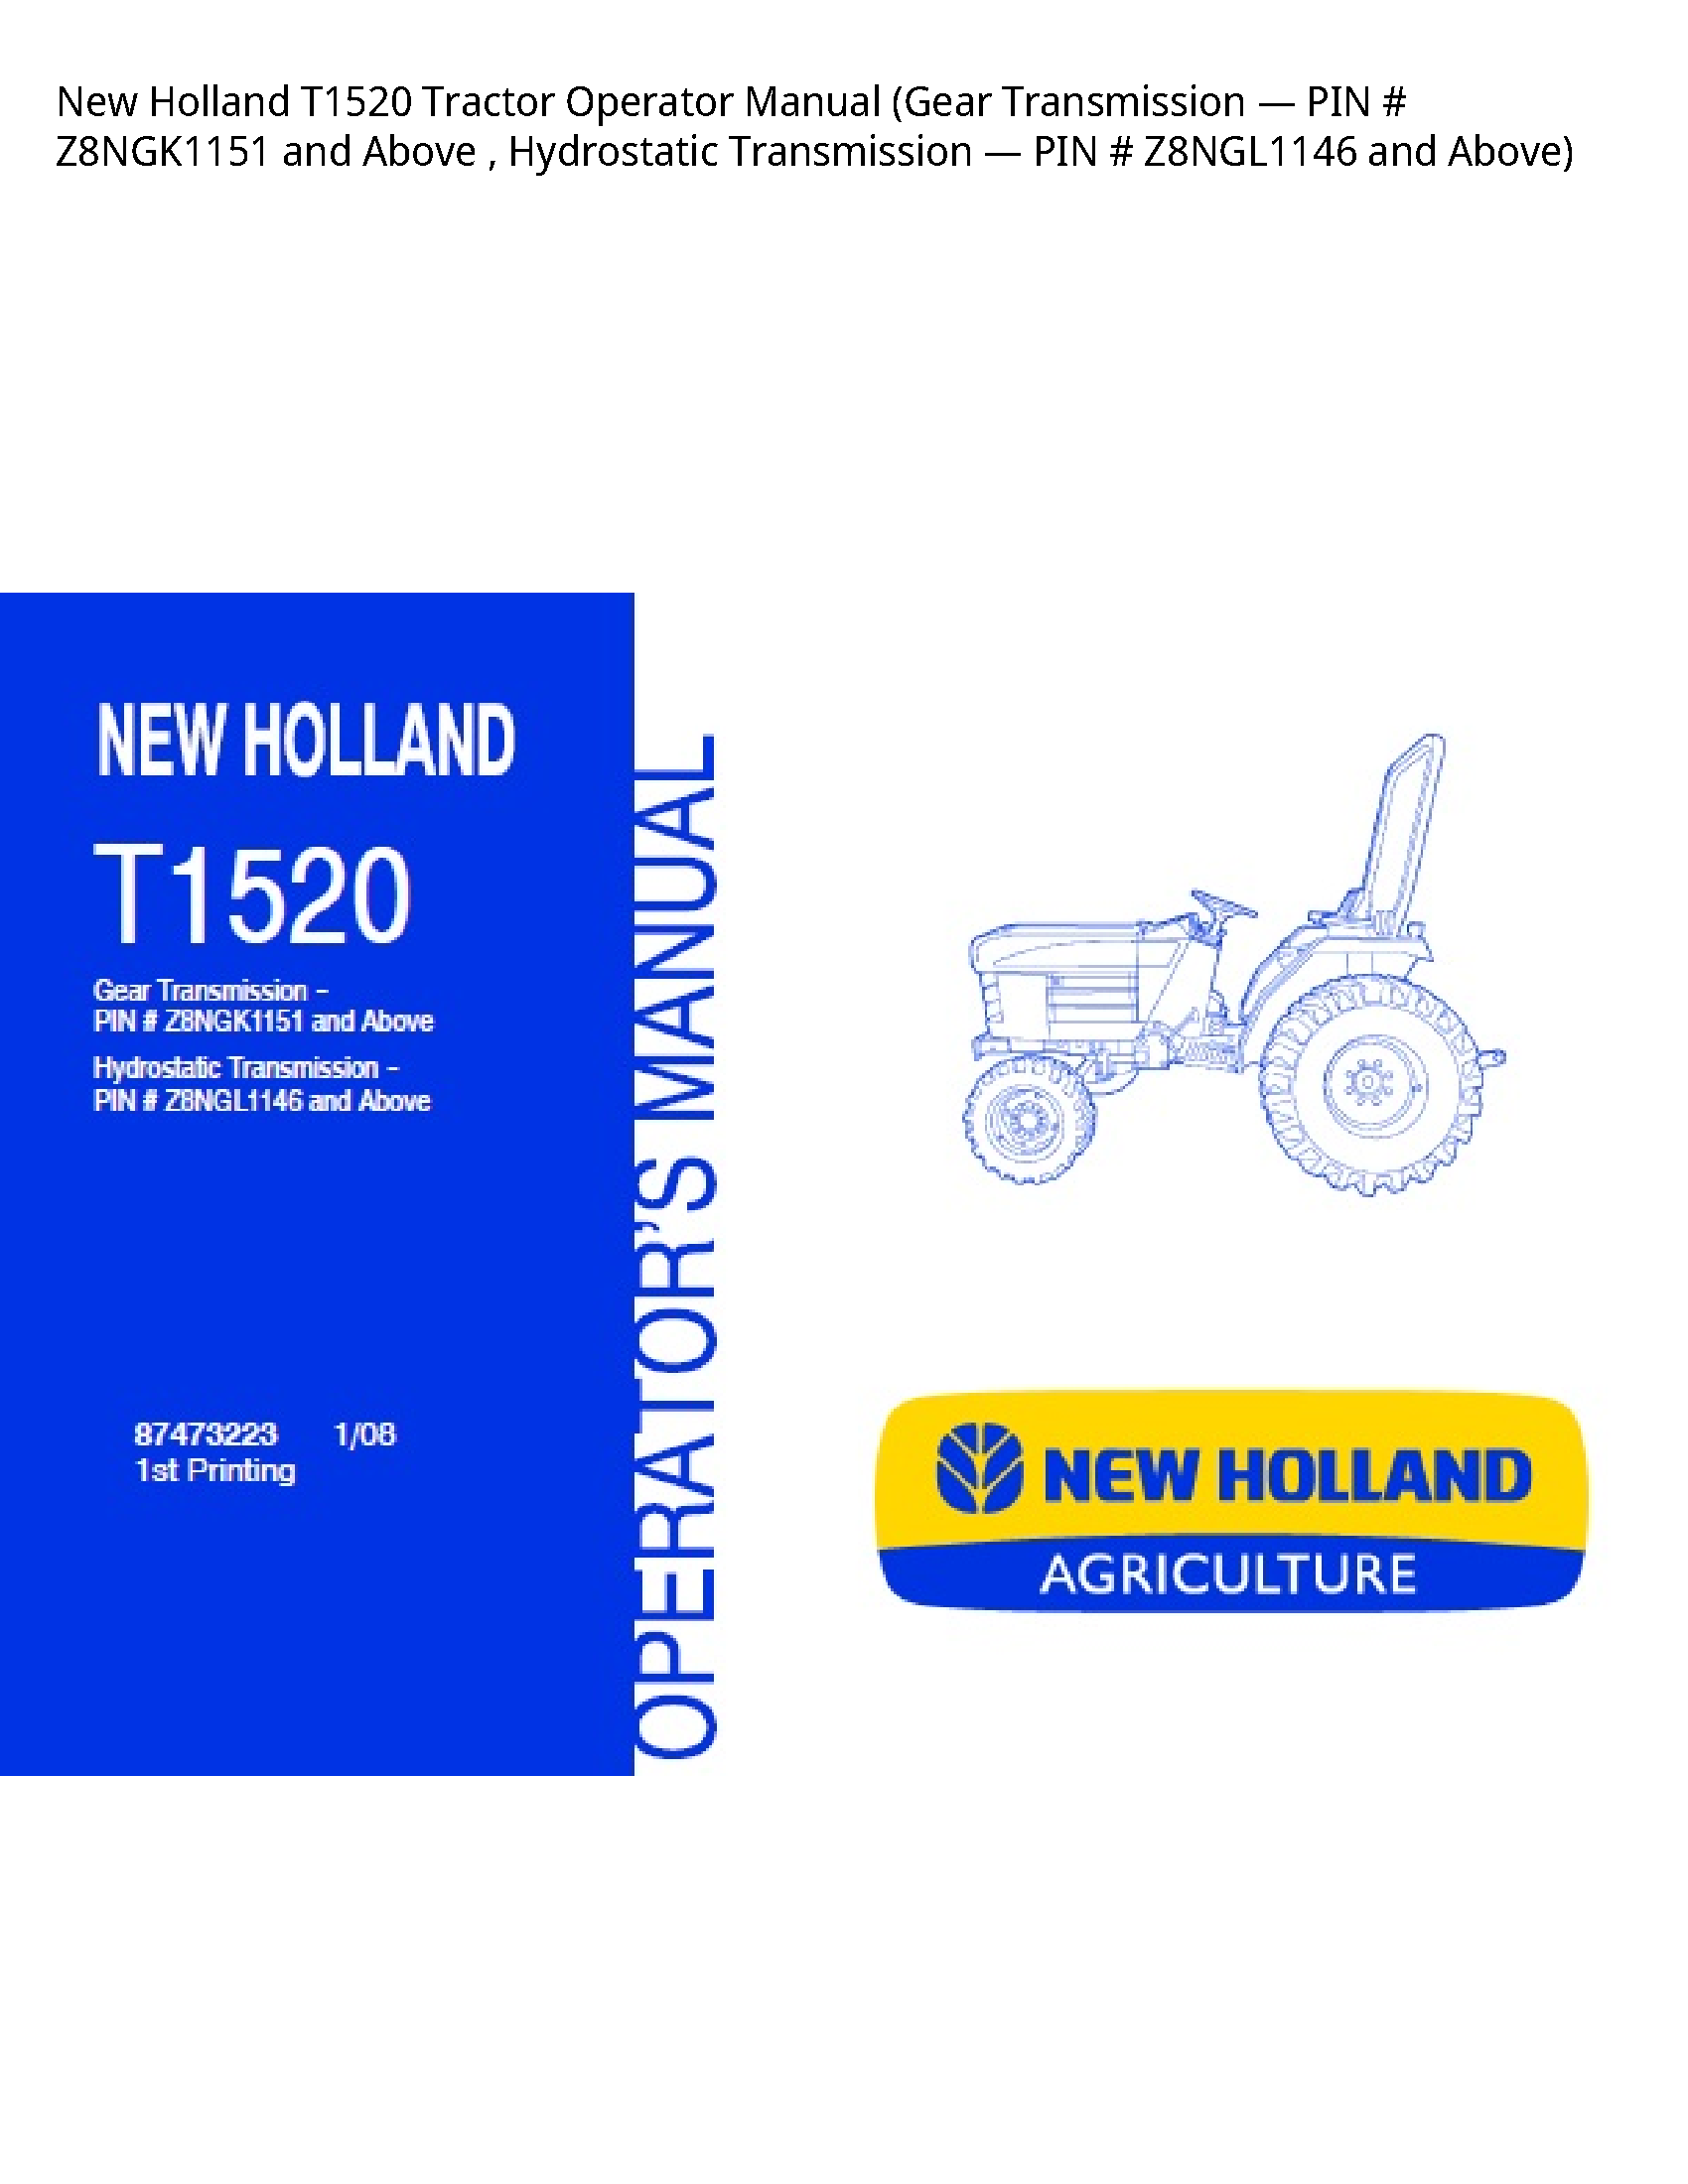 New Holland T1520 Tractor Operator manual